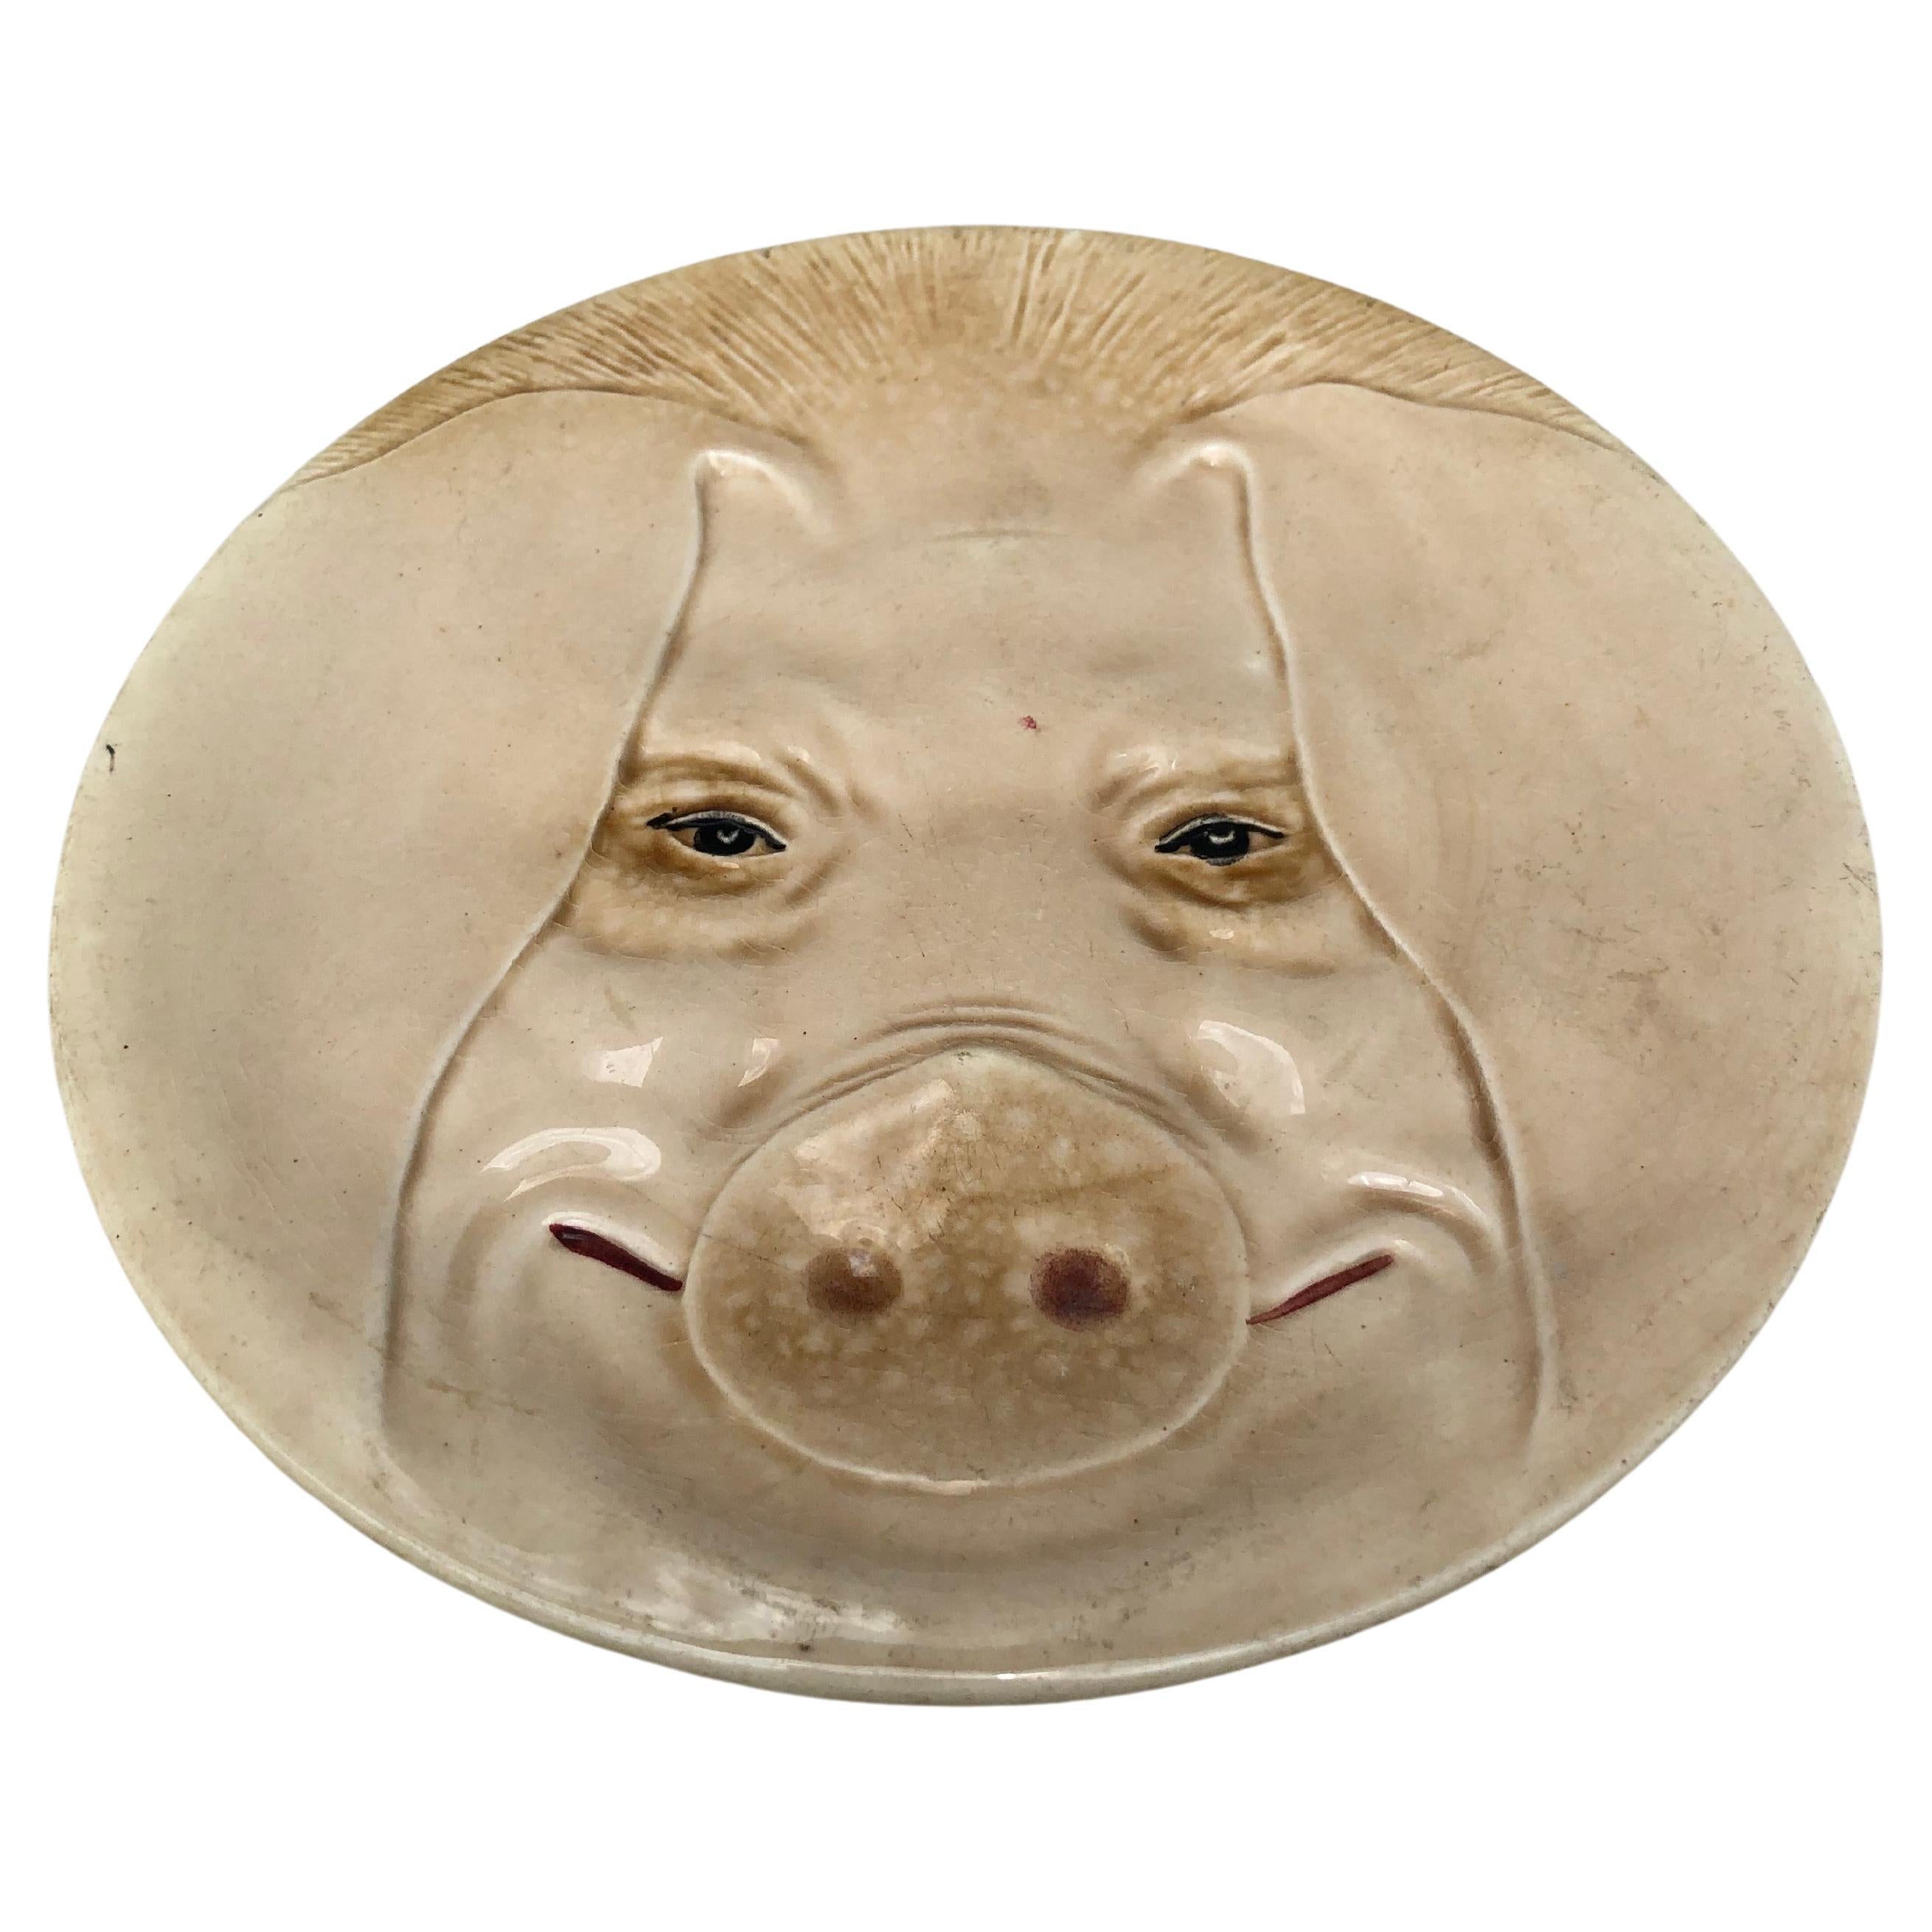 Unusual French Majolica plate with a pig head made by Orchies (North of France), circa 1900.